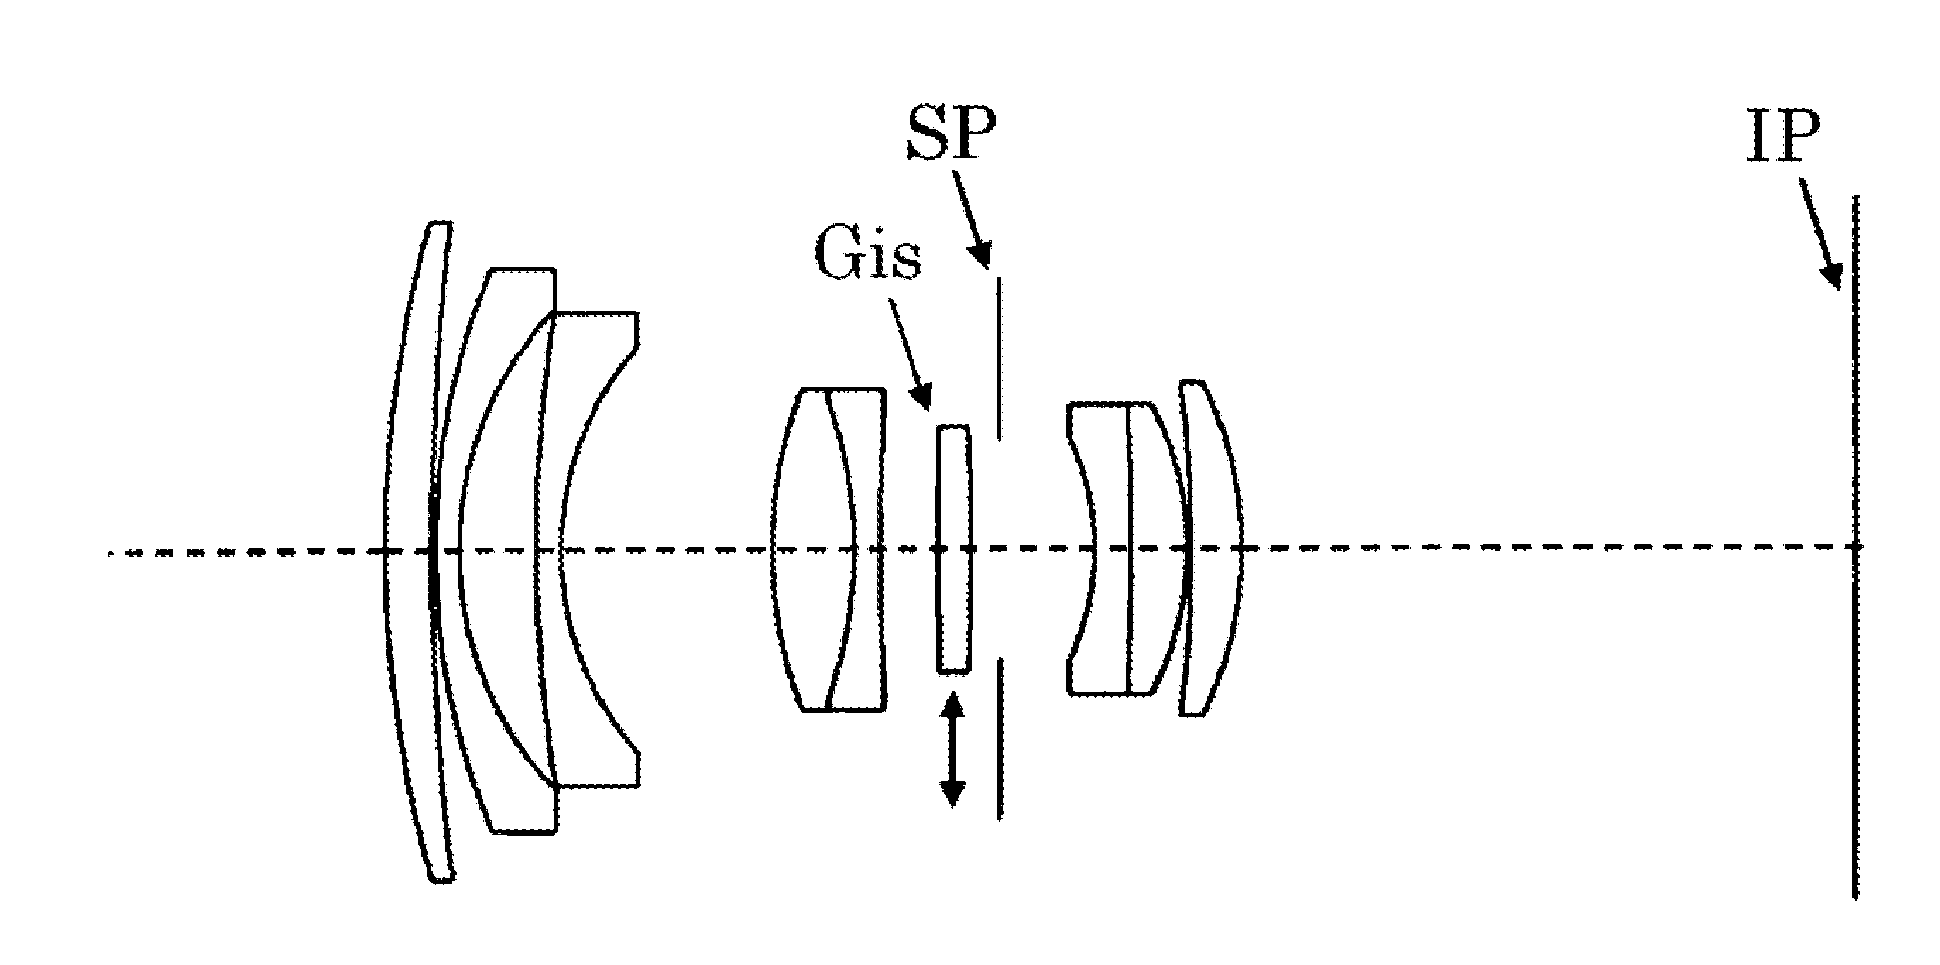 Fixed focal length lens having image stabilization function